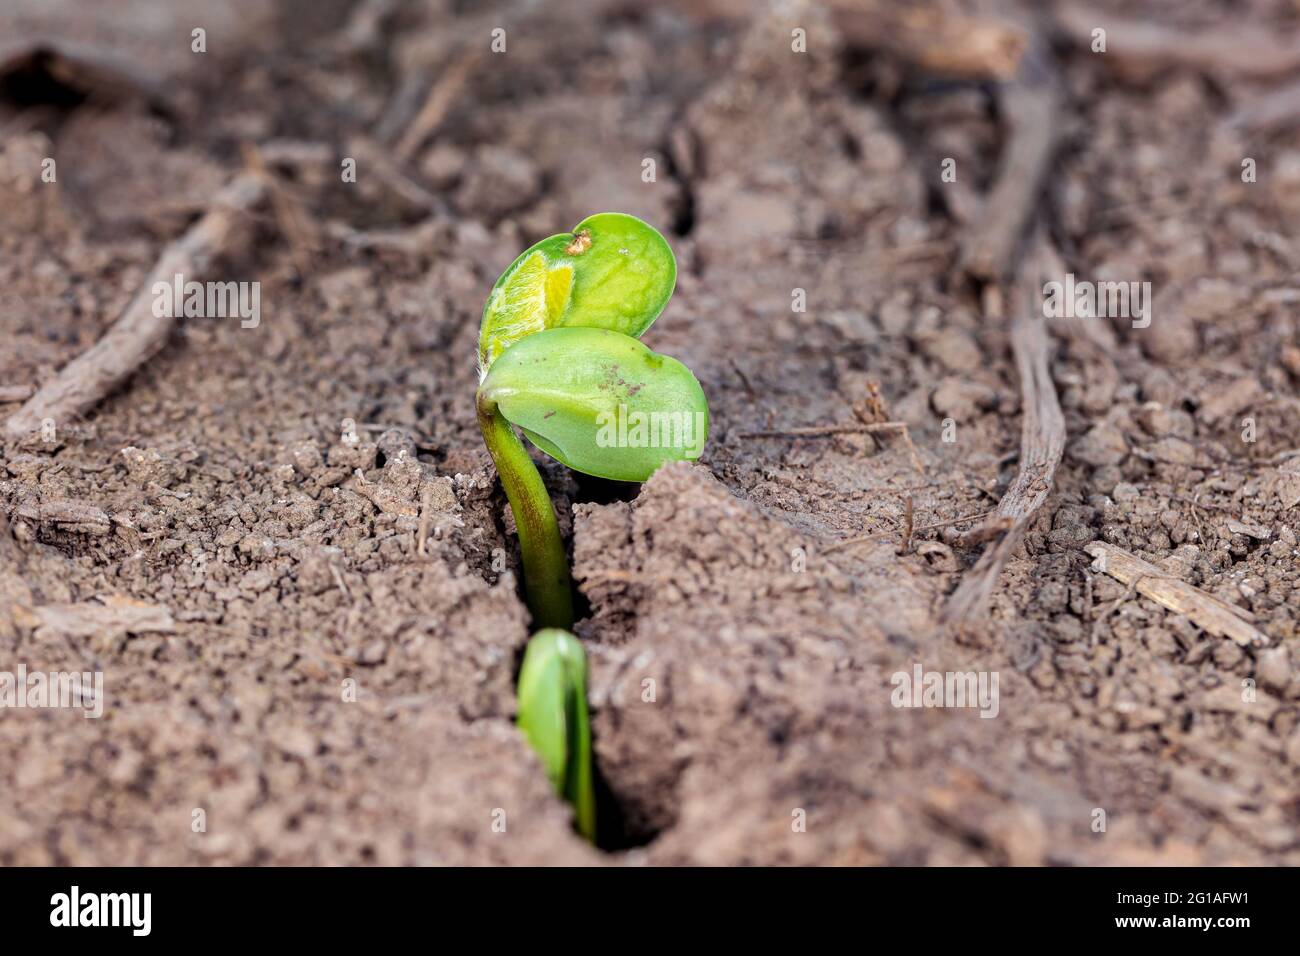 Soybean plant emerging in farm field. Concept of soybean planting season, precision agriculture and farming. Stock Photo